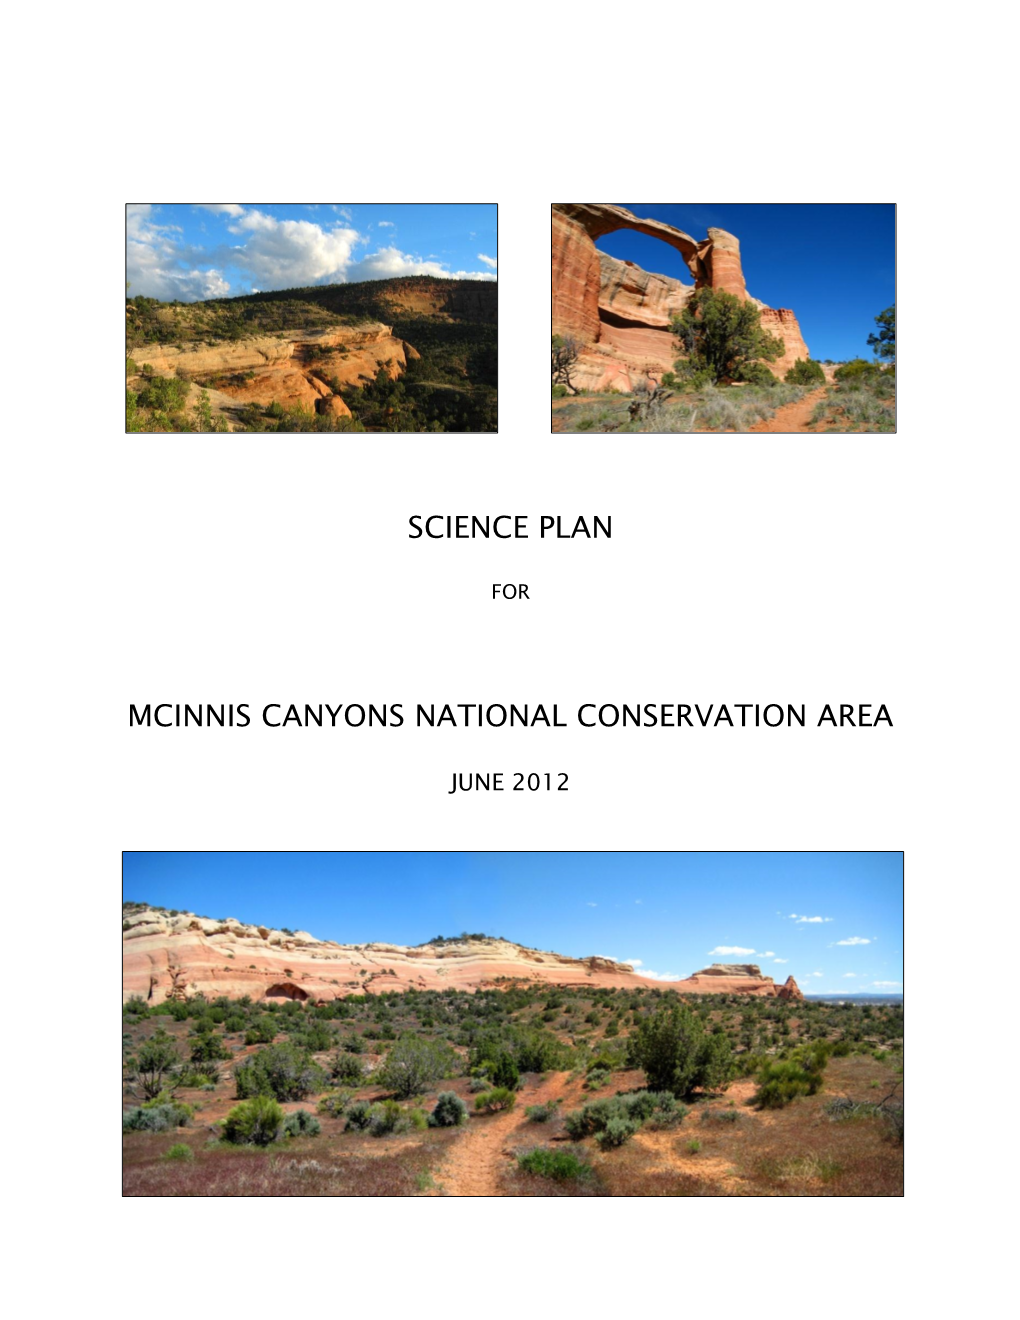 Science Plan Mcinnis Canyons National Conservation Area